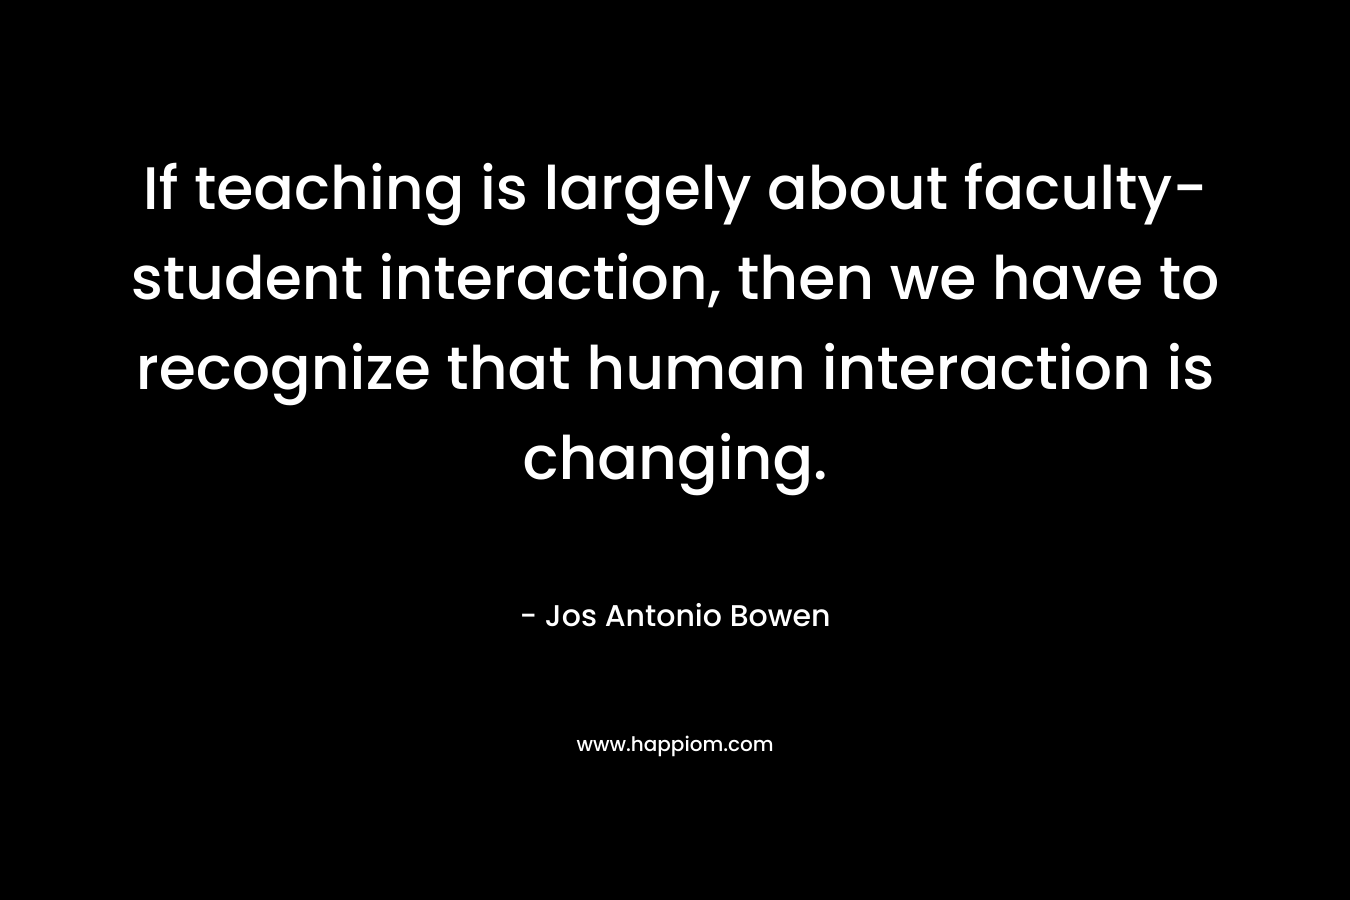 If teaching is largely about faculty-student interaction, then we have to recognize that human interaction is changing. – Jos Antonio Bowen